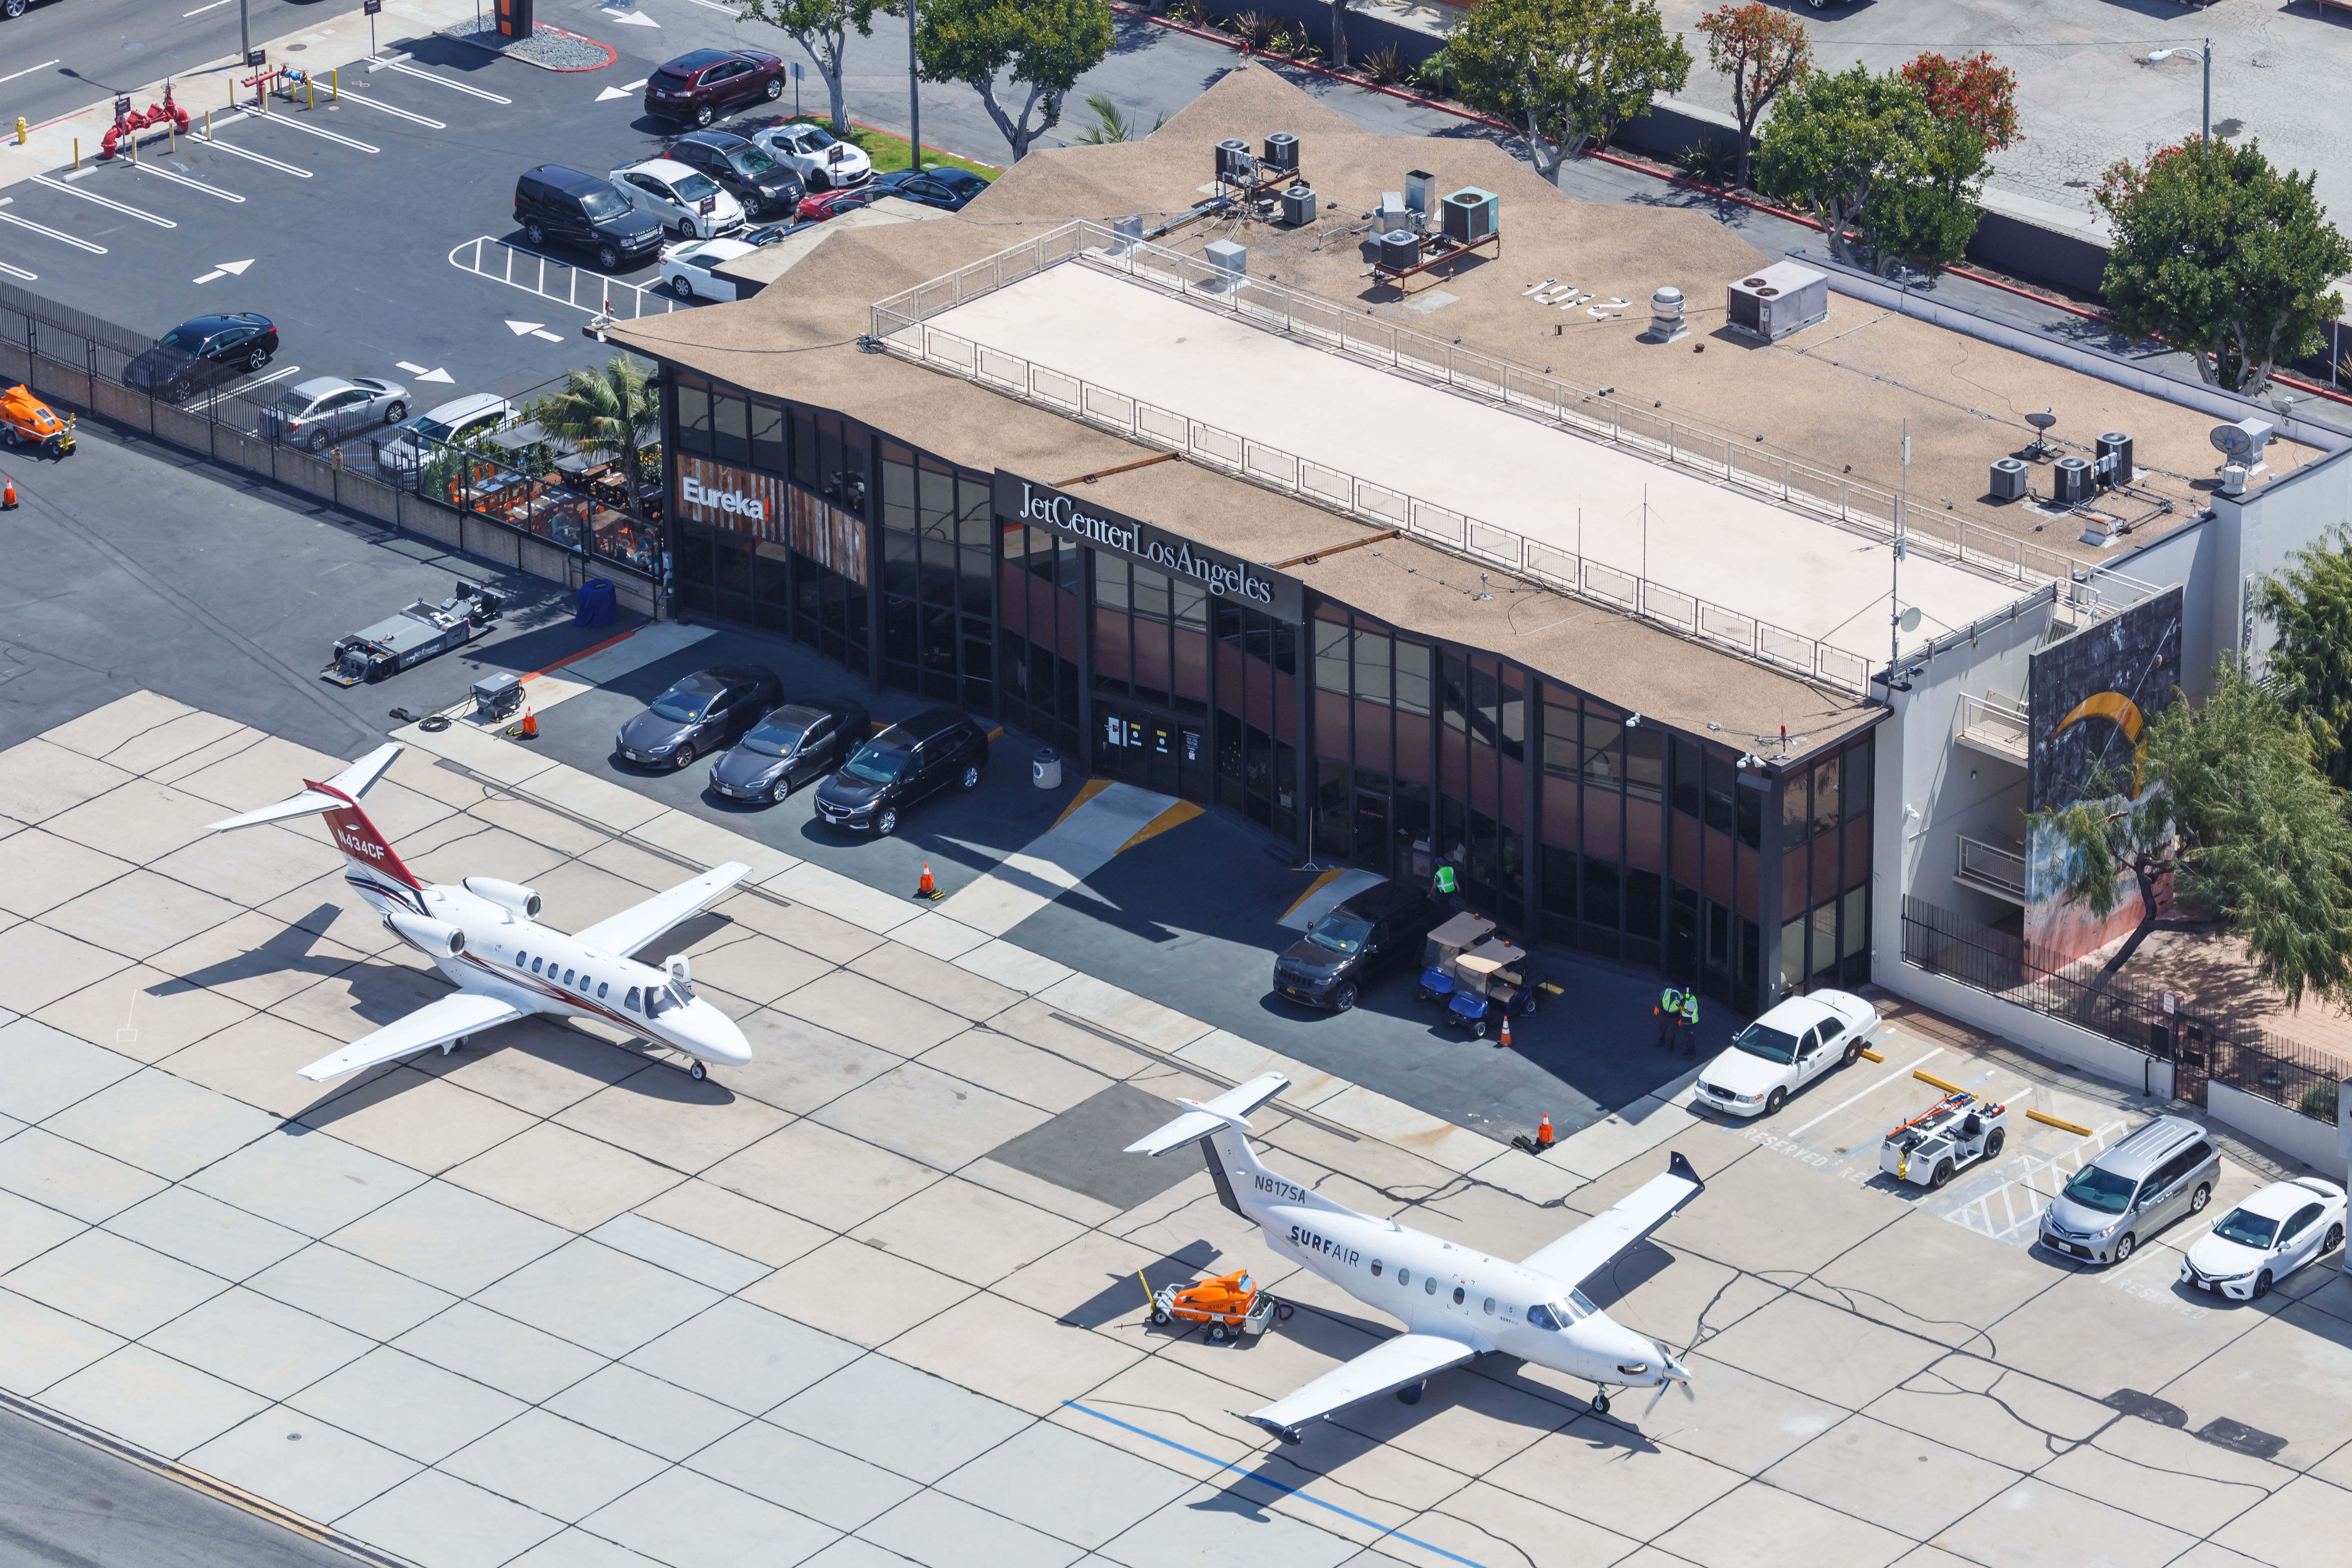 Two small aircraft, including one Surf Air Pilatus PC-12, parked at a private terminal in Los Angeles.